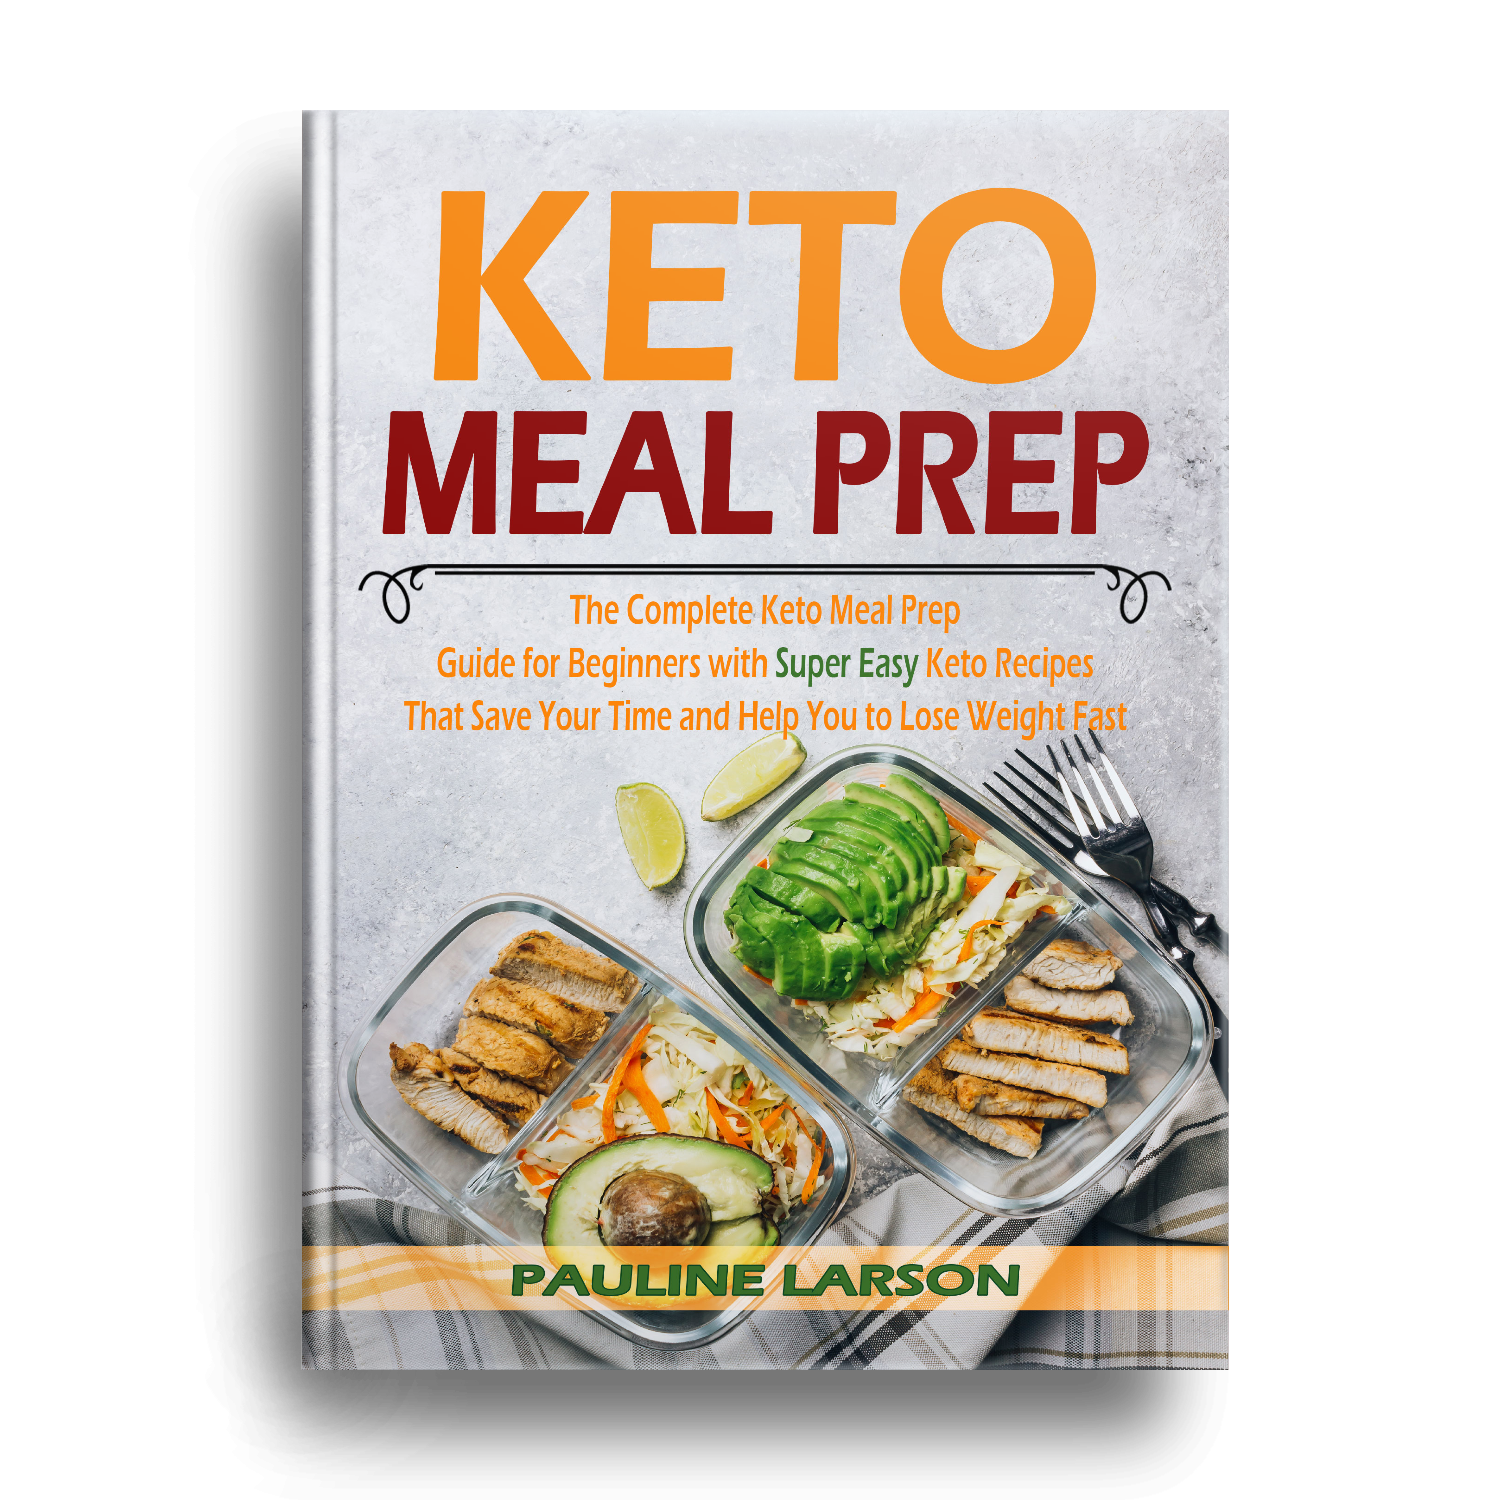 FREE: Keto Meal Prep: The Complete Keto Meal Prep Guide for Beginners with Super Easy Keto Recipes That Save Your Time and Help You Lose Weight Fast by Pauline Larson